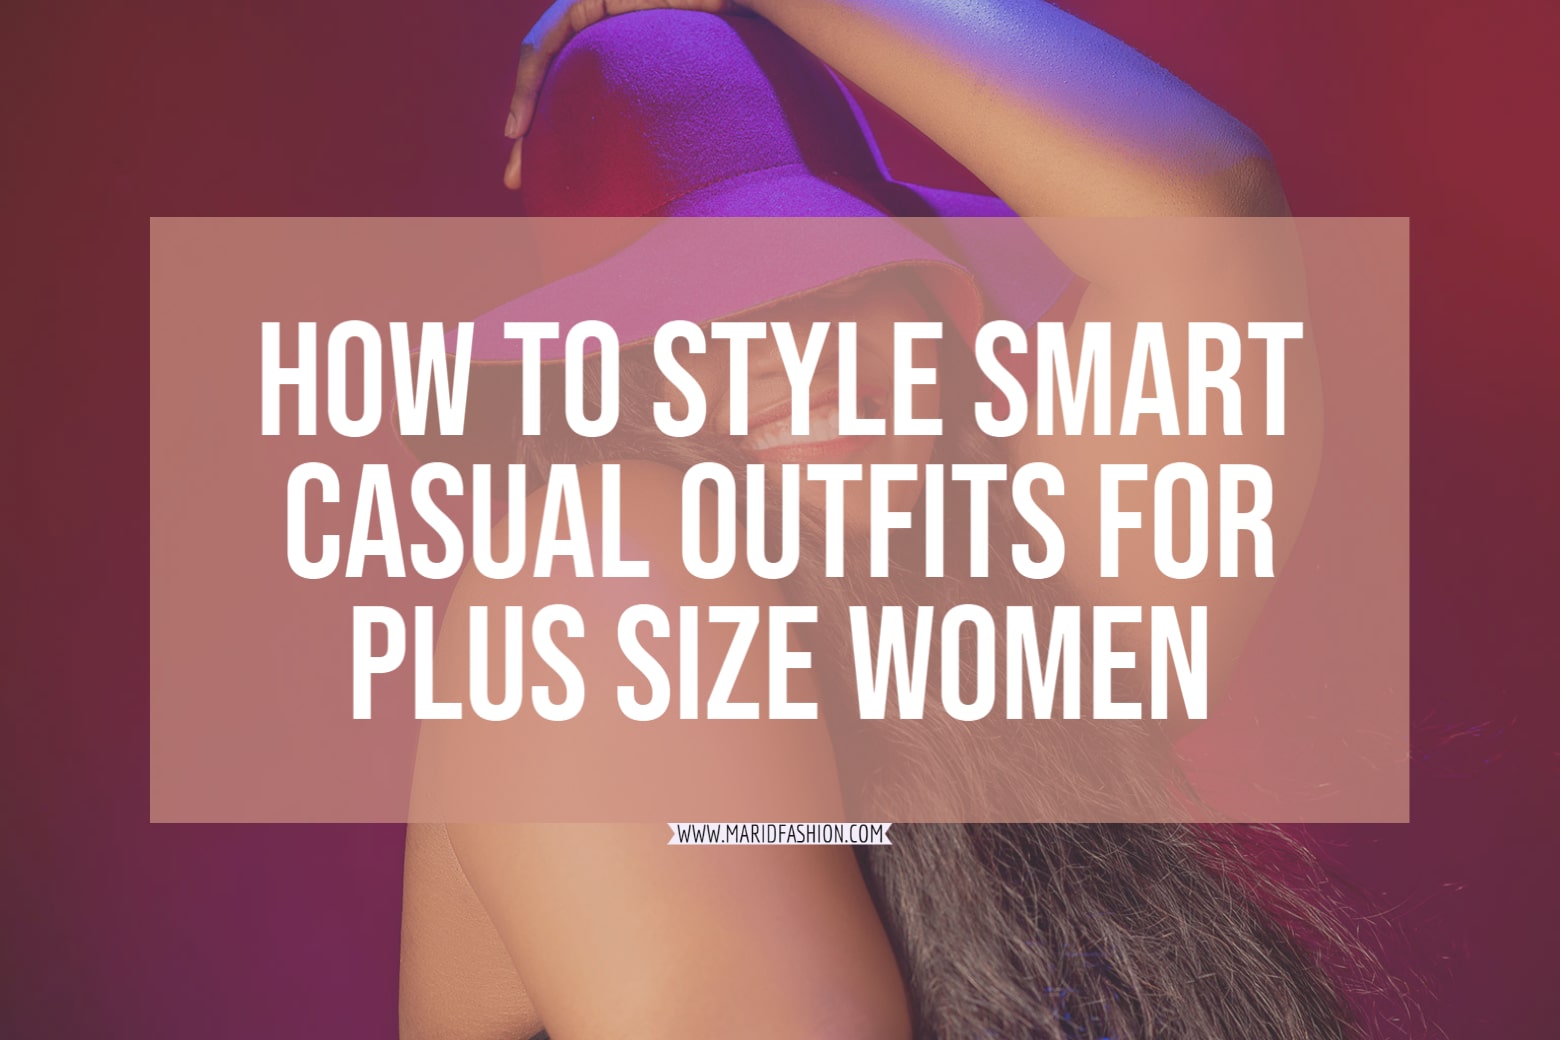 How to Create Smart Casual Plus Size Women’s Outfits in an Easy Way